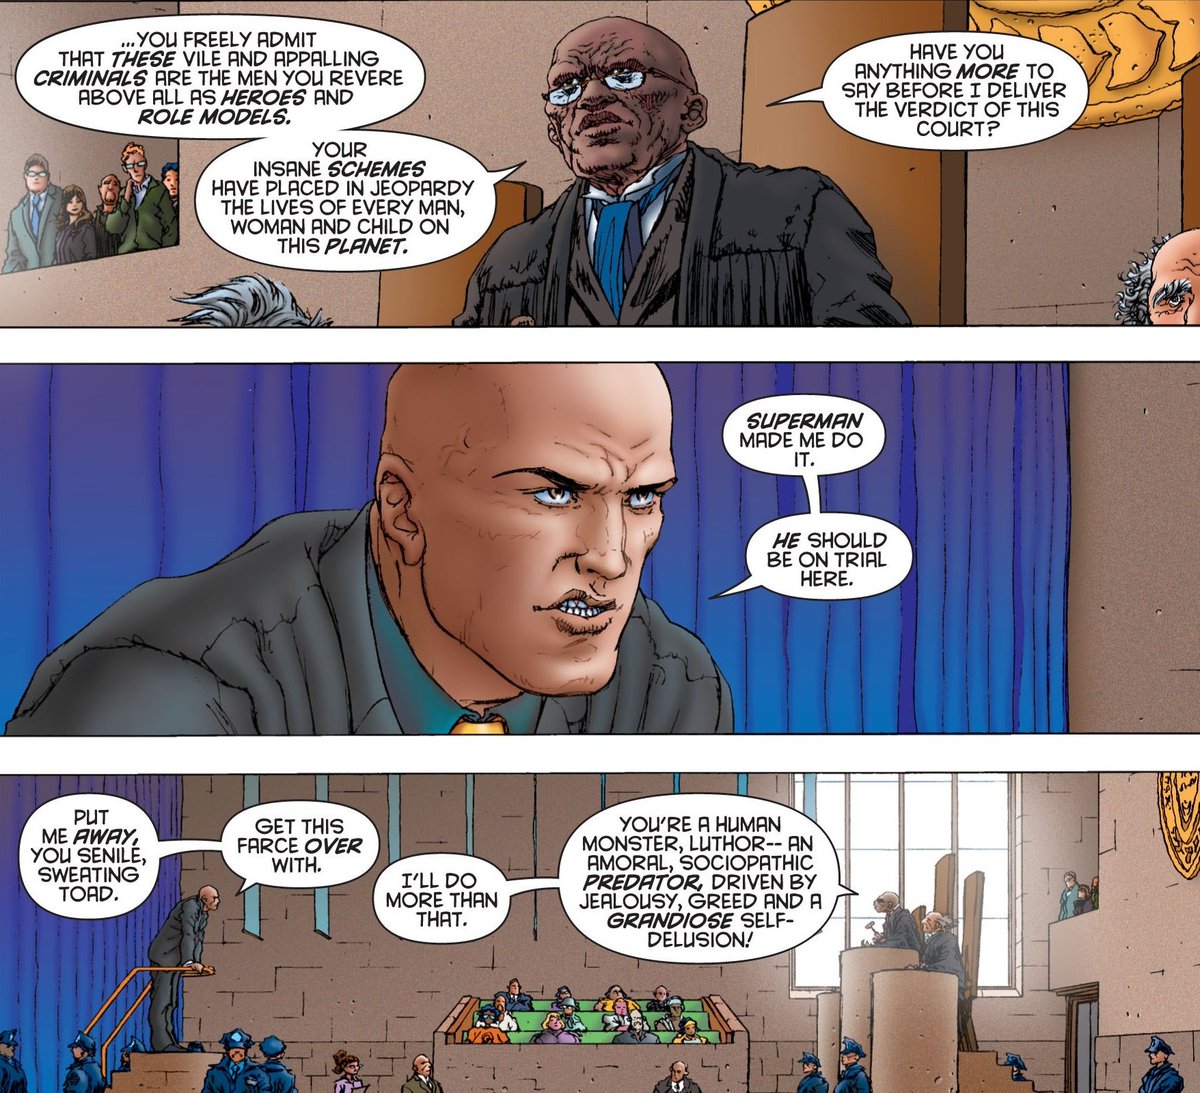 I love that in the same way Morrison summed up some fundamental aspects of Superman in a few panels, they summed up Luthor with only two in here.